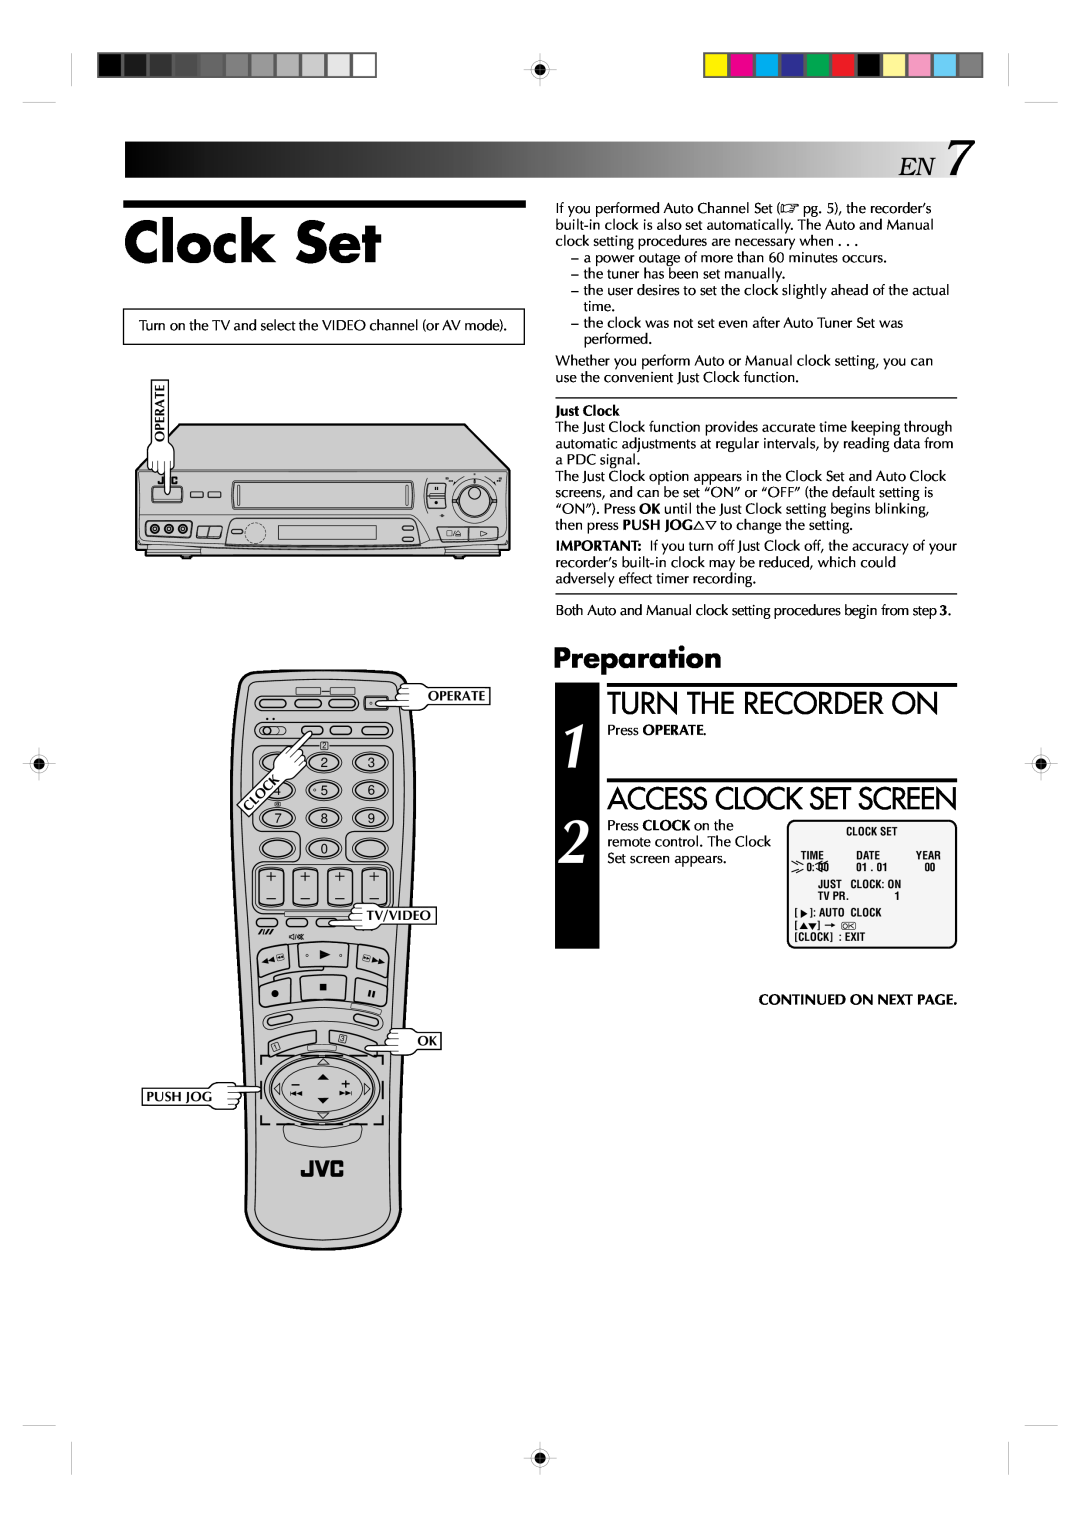 JVC HR-J638E/EH specifications Preparation, Turn The Recorder On, Access Clock Set Screen, Just Clock, Press OPERATE 